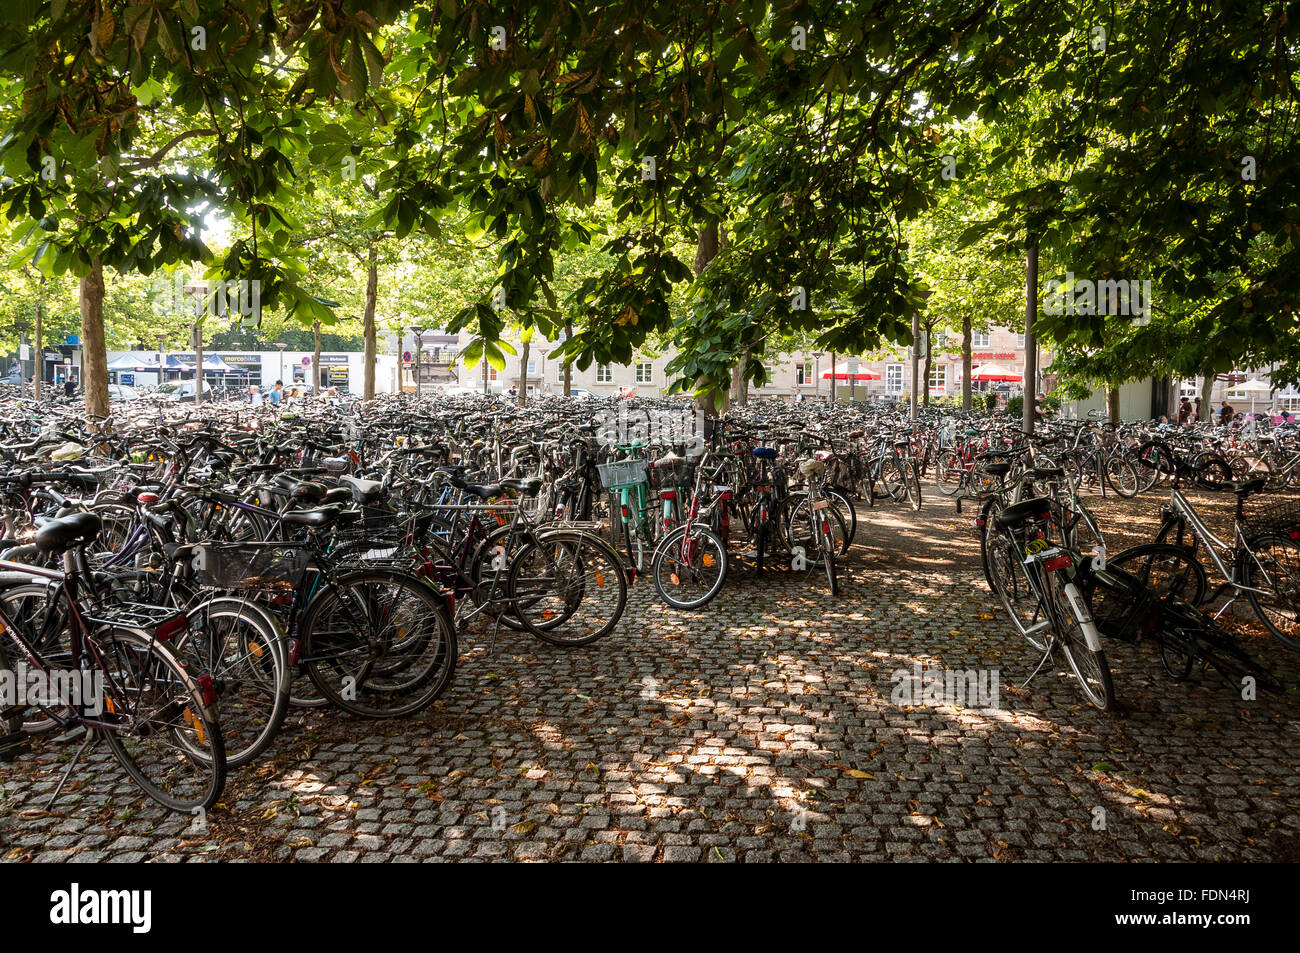 Over crowded bicycle parking next to the train station Stock Photo